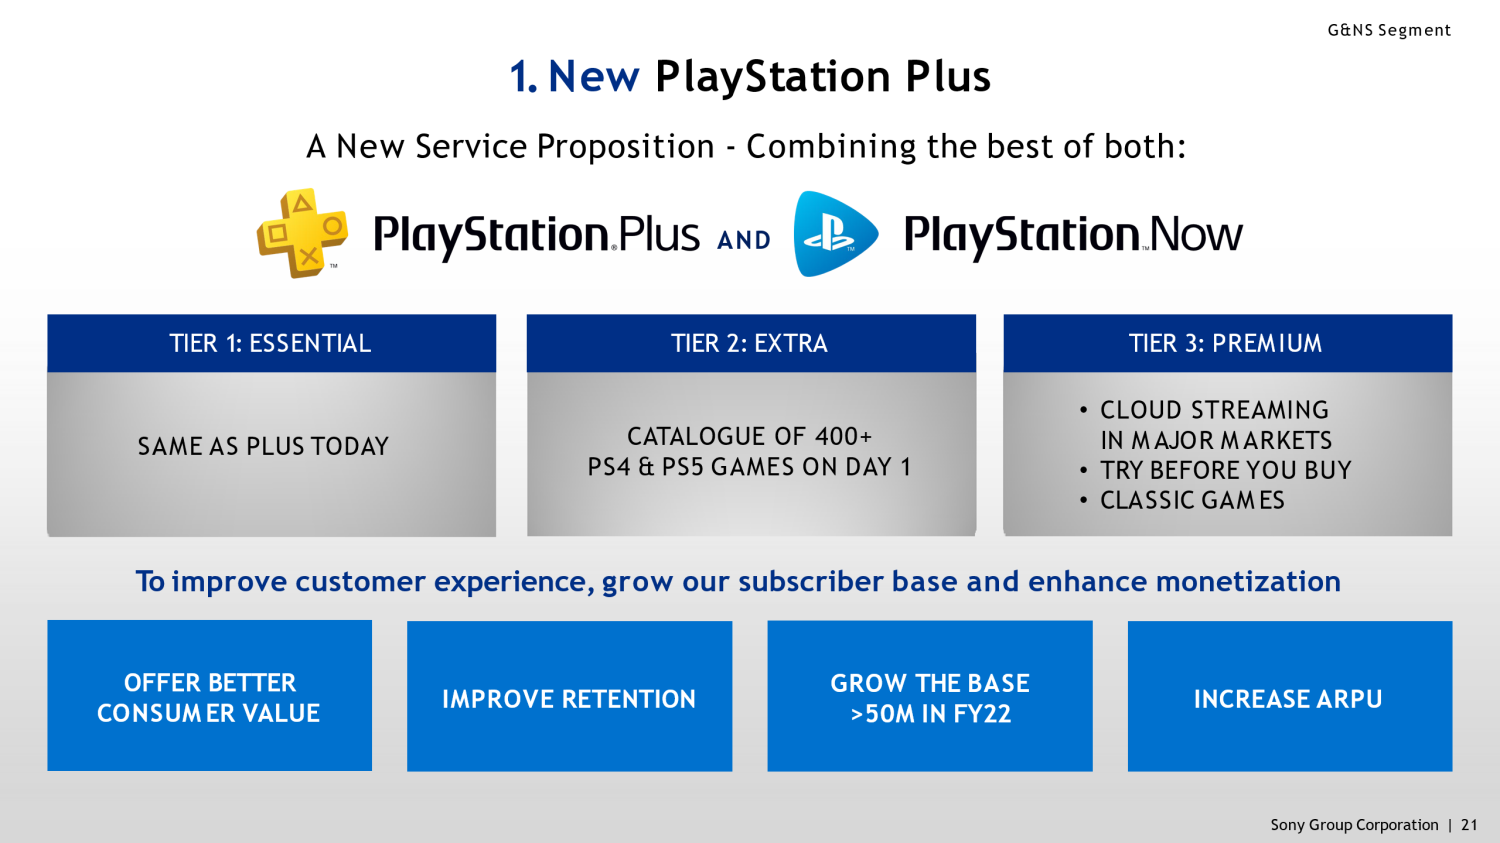 Sony launches new PlayStation Plus tiers in North America